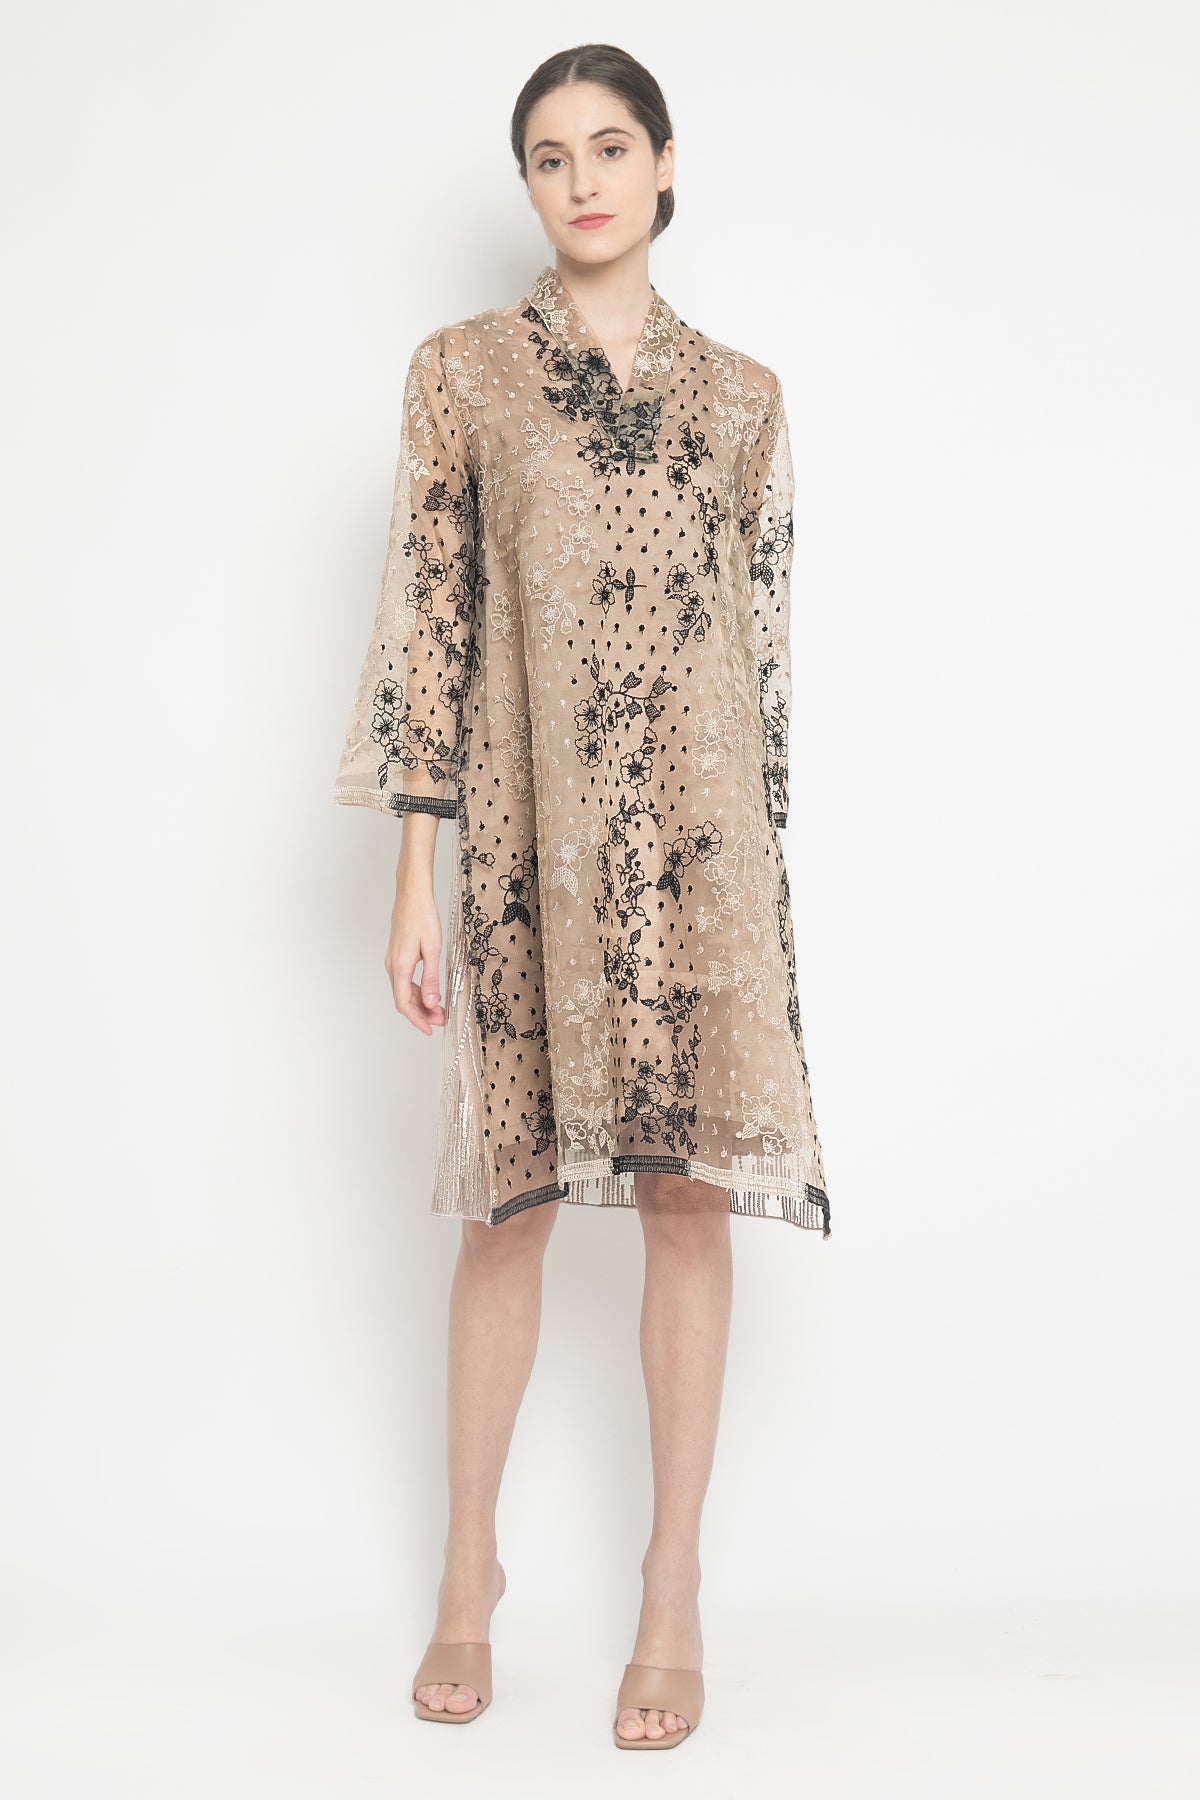 Reina Dress in Nude and Black